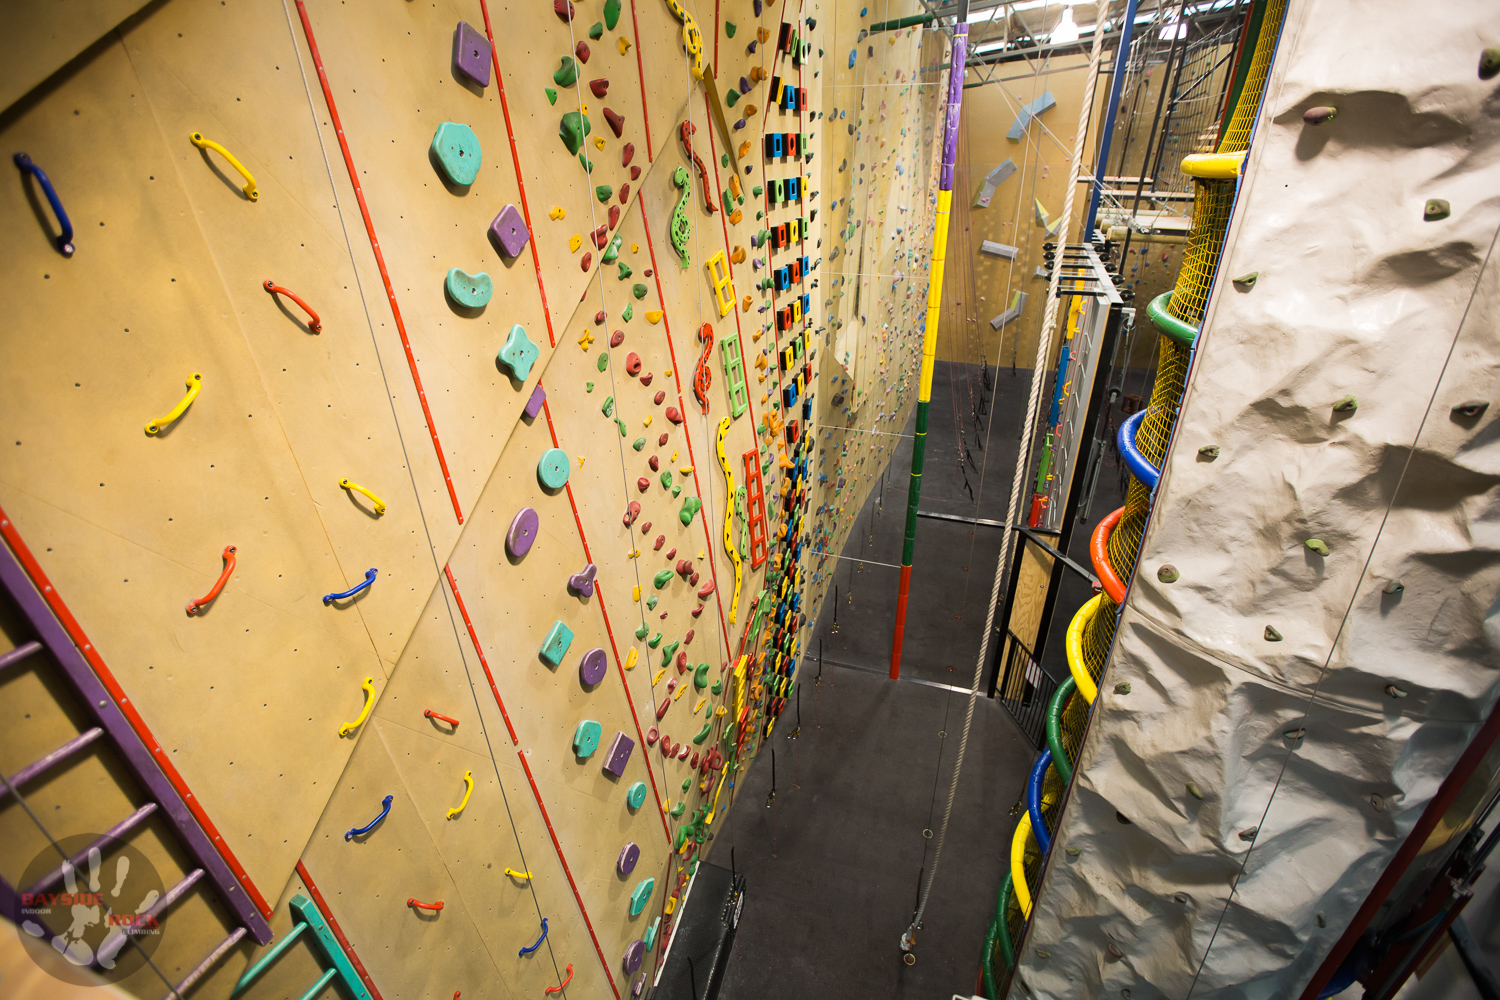 Bayside Climbing Gym with top rope routes pictured and a variety of hold styles.